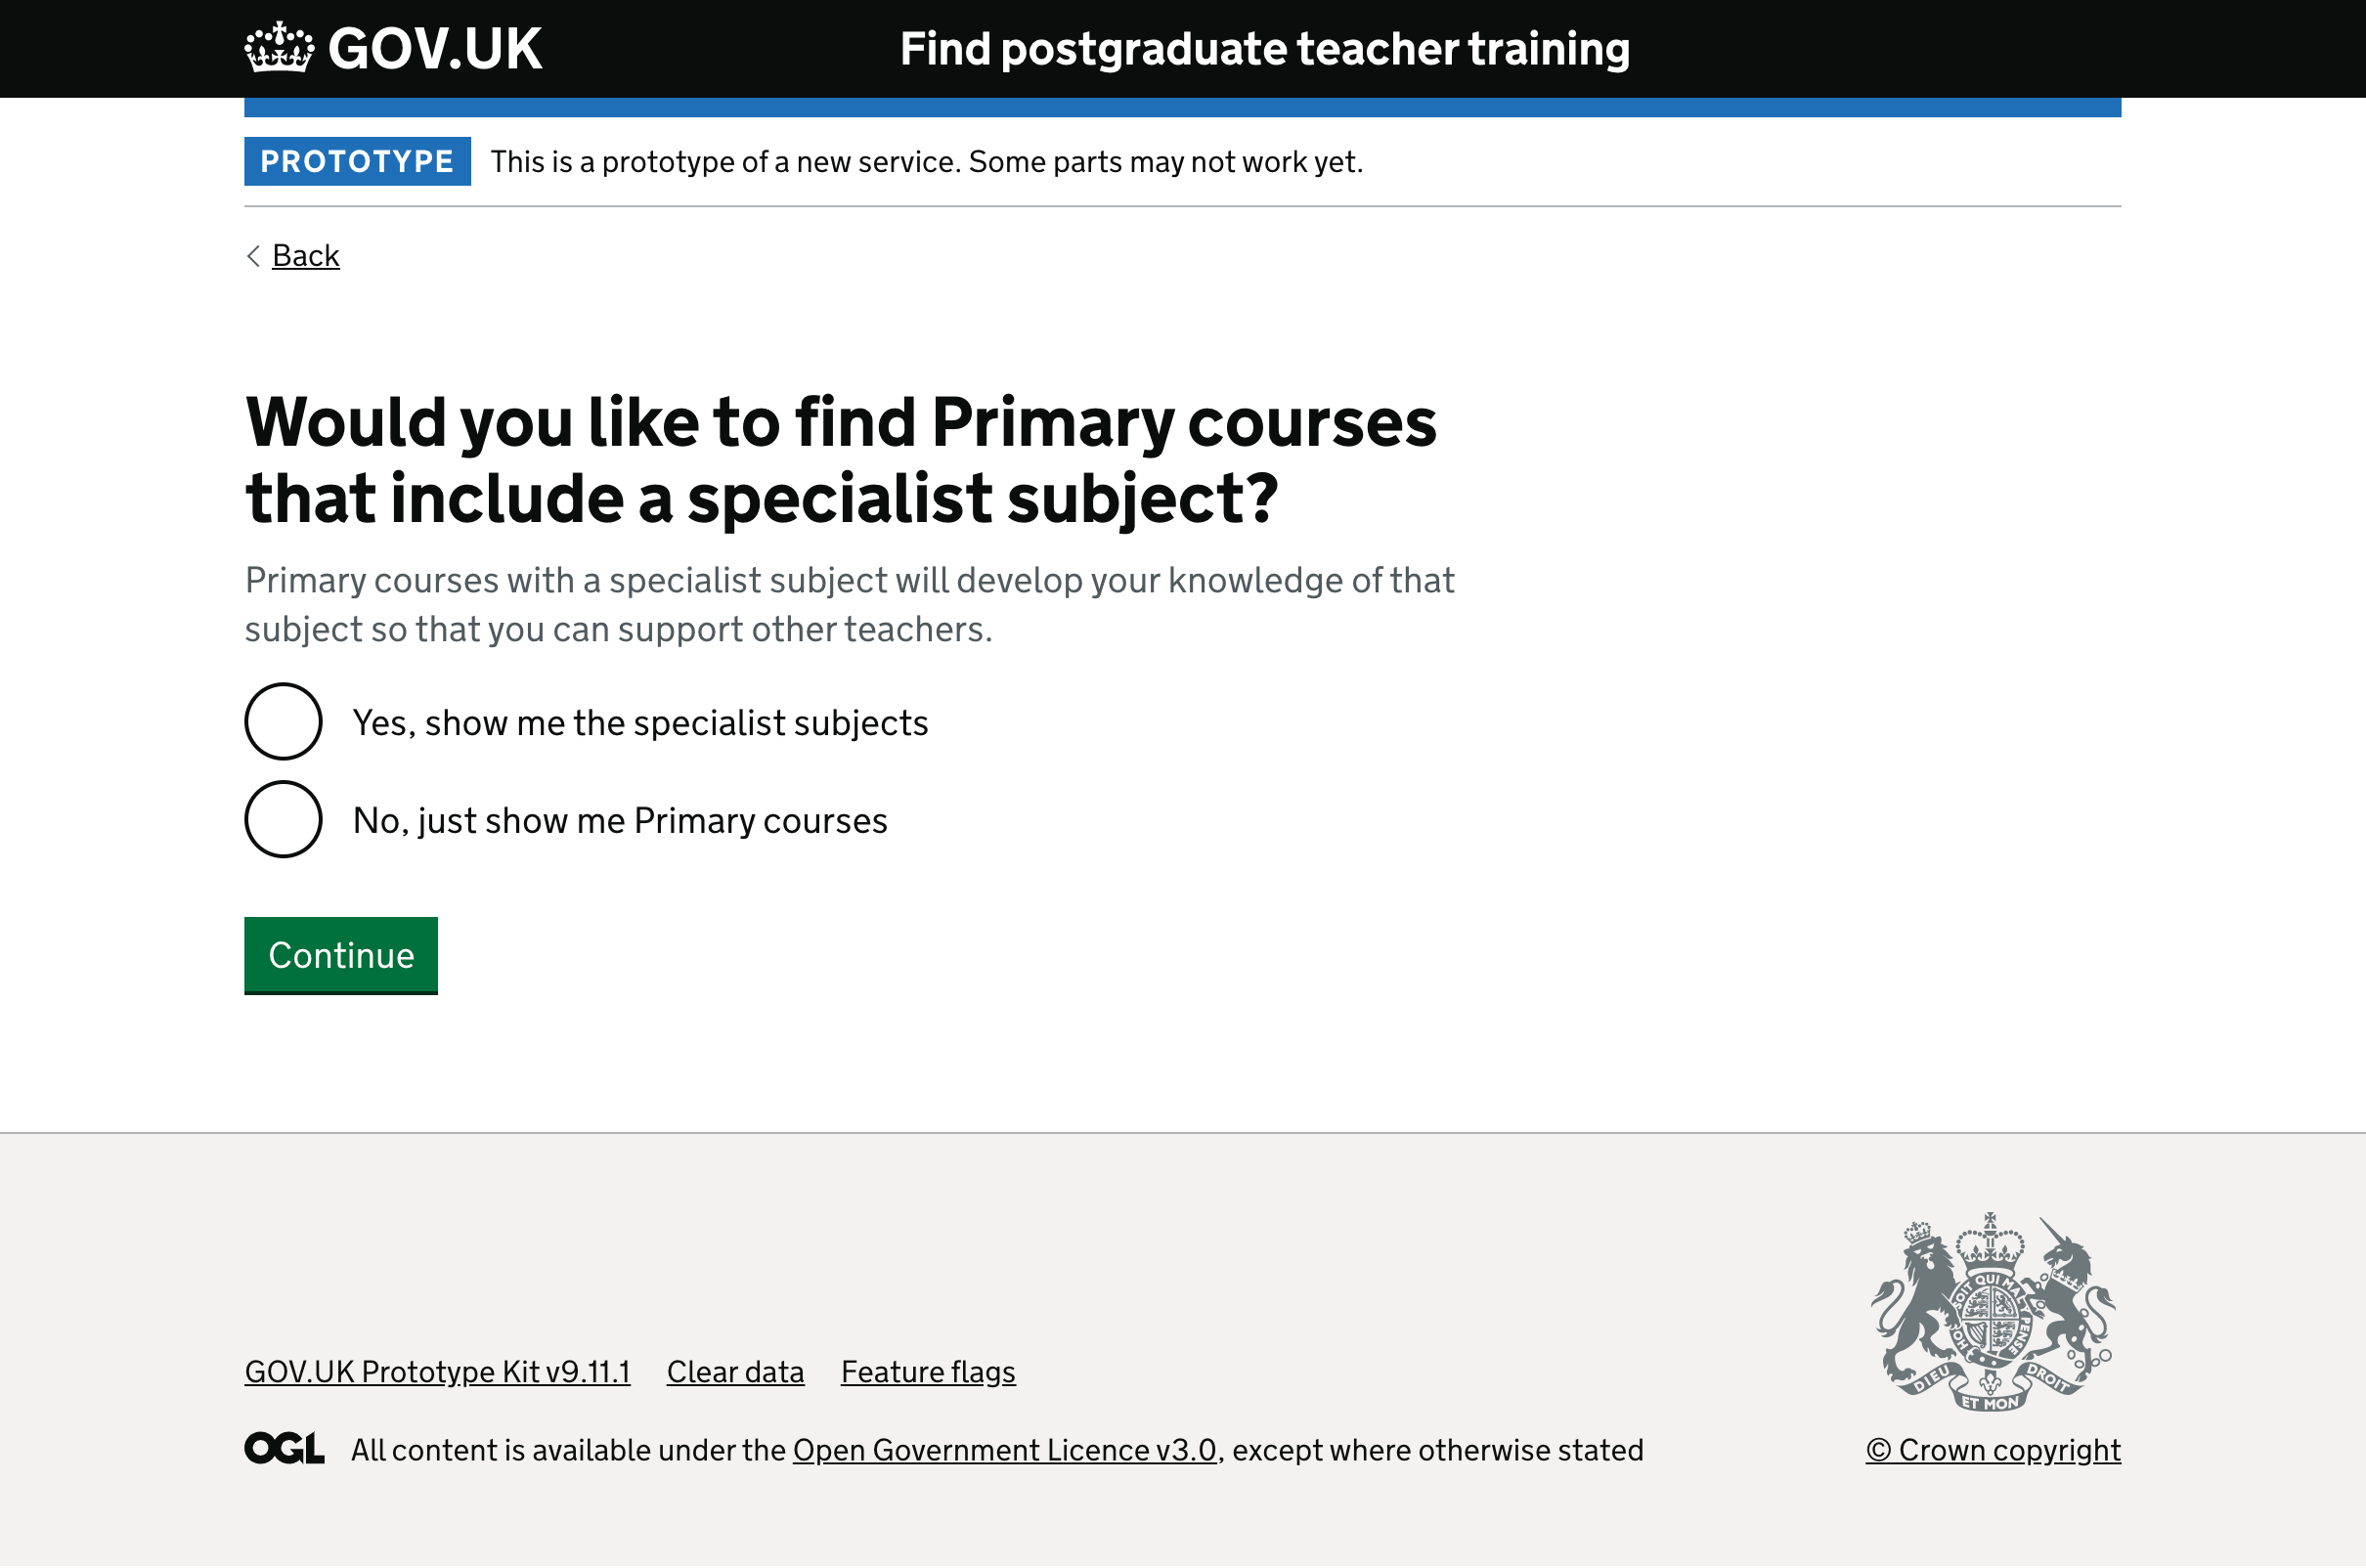 Screenshot of the new page asking users if they would like to find Primary courses that include a specialist subject